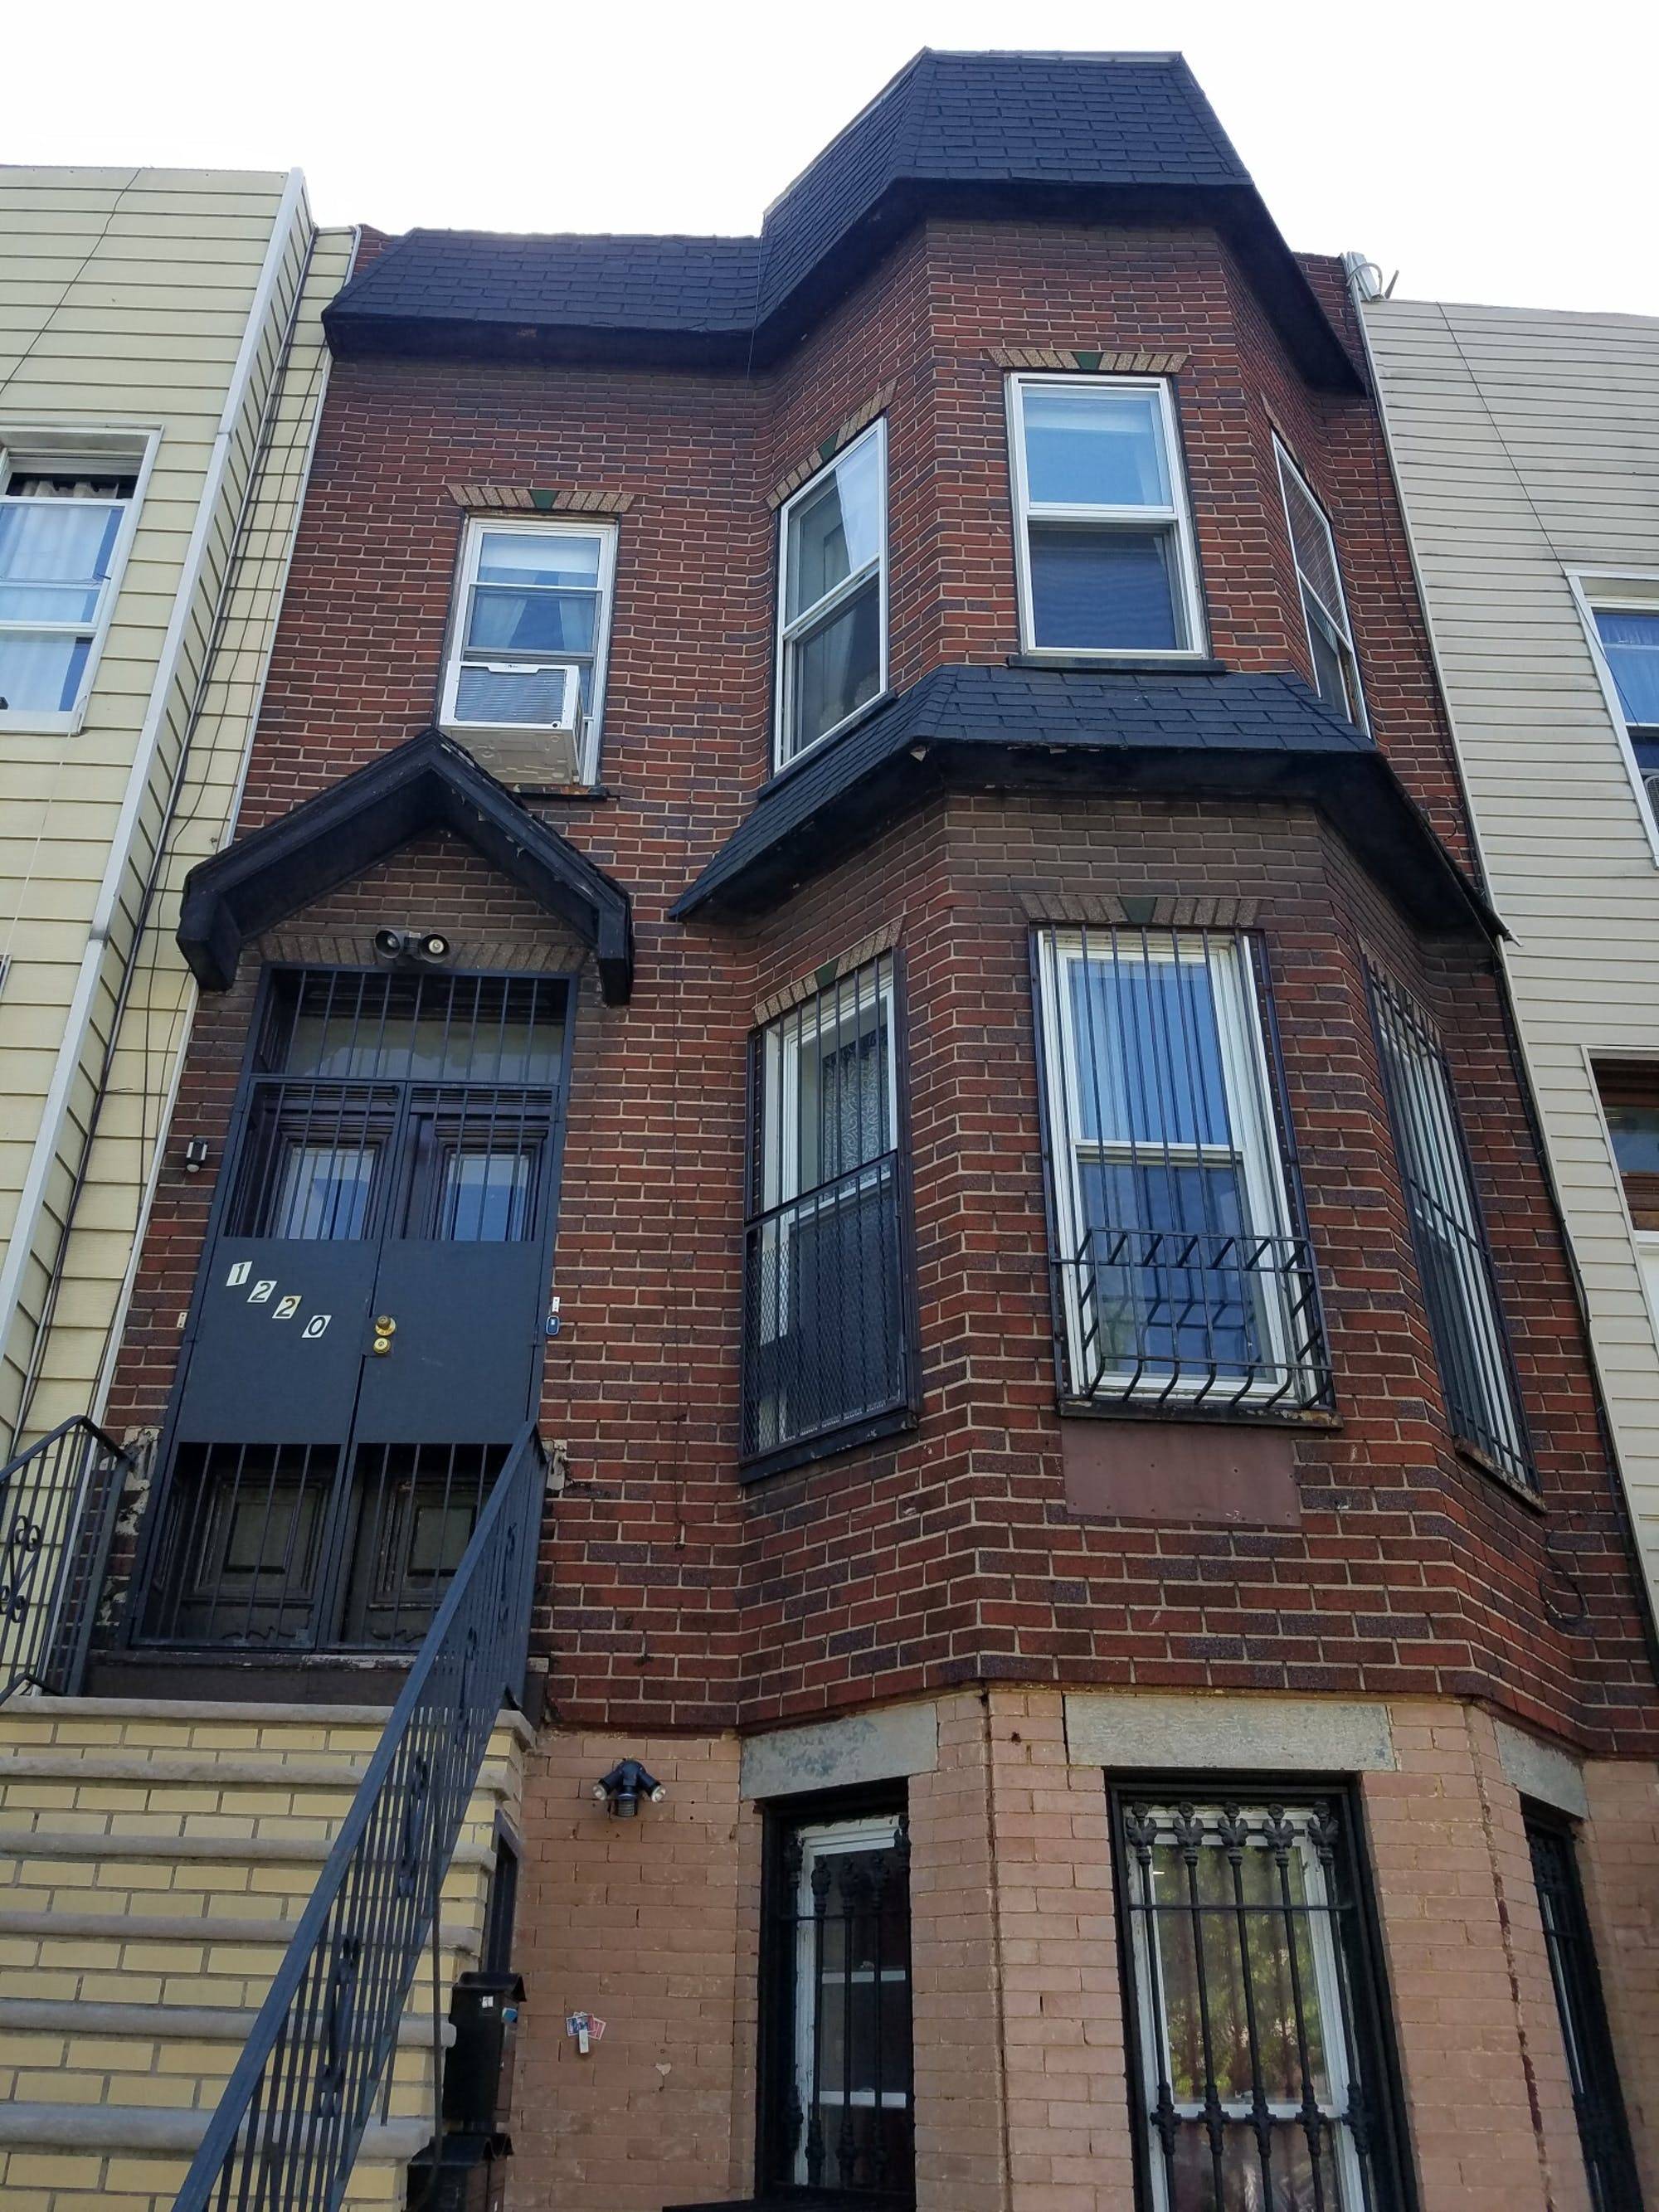 Lovely 3 Family house in prime Bushwick location 1220 Decatur Street is a 3 family building that underwent a gut renovation in 2016.